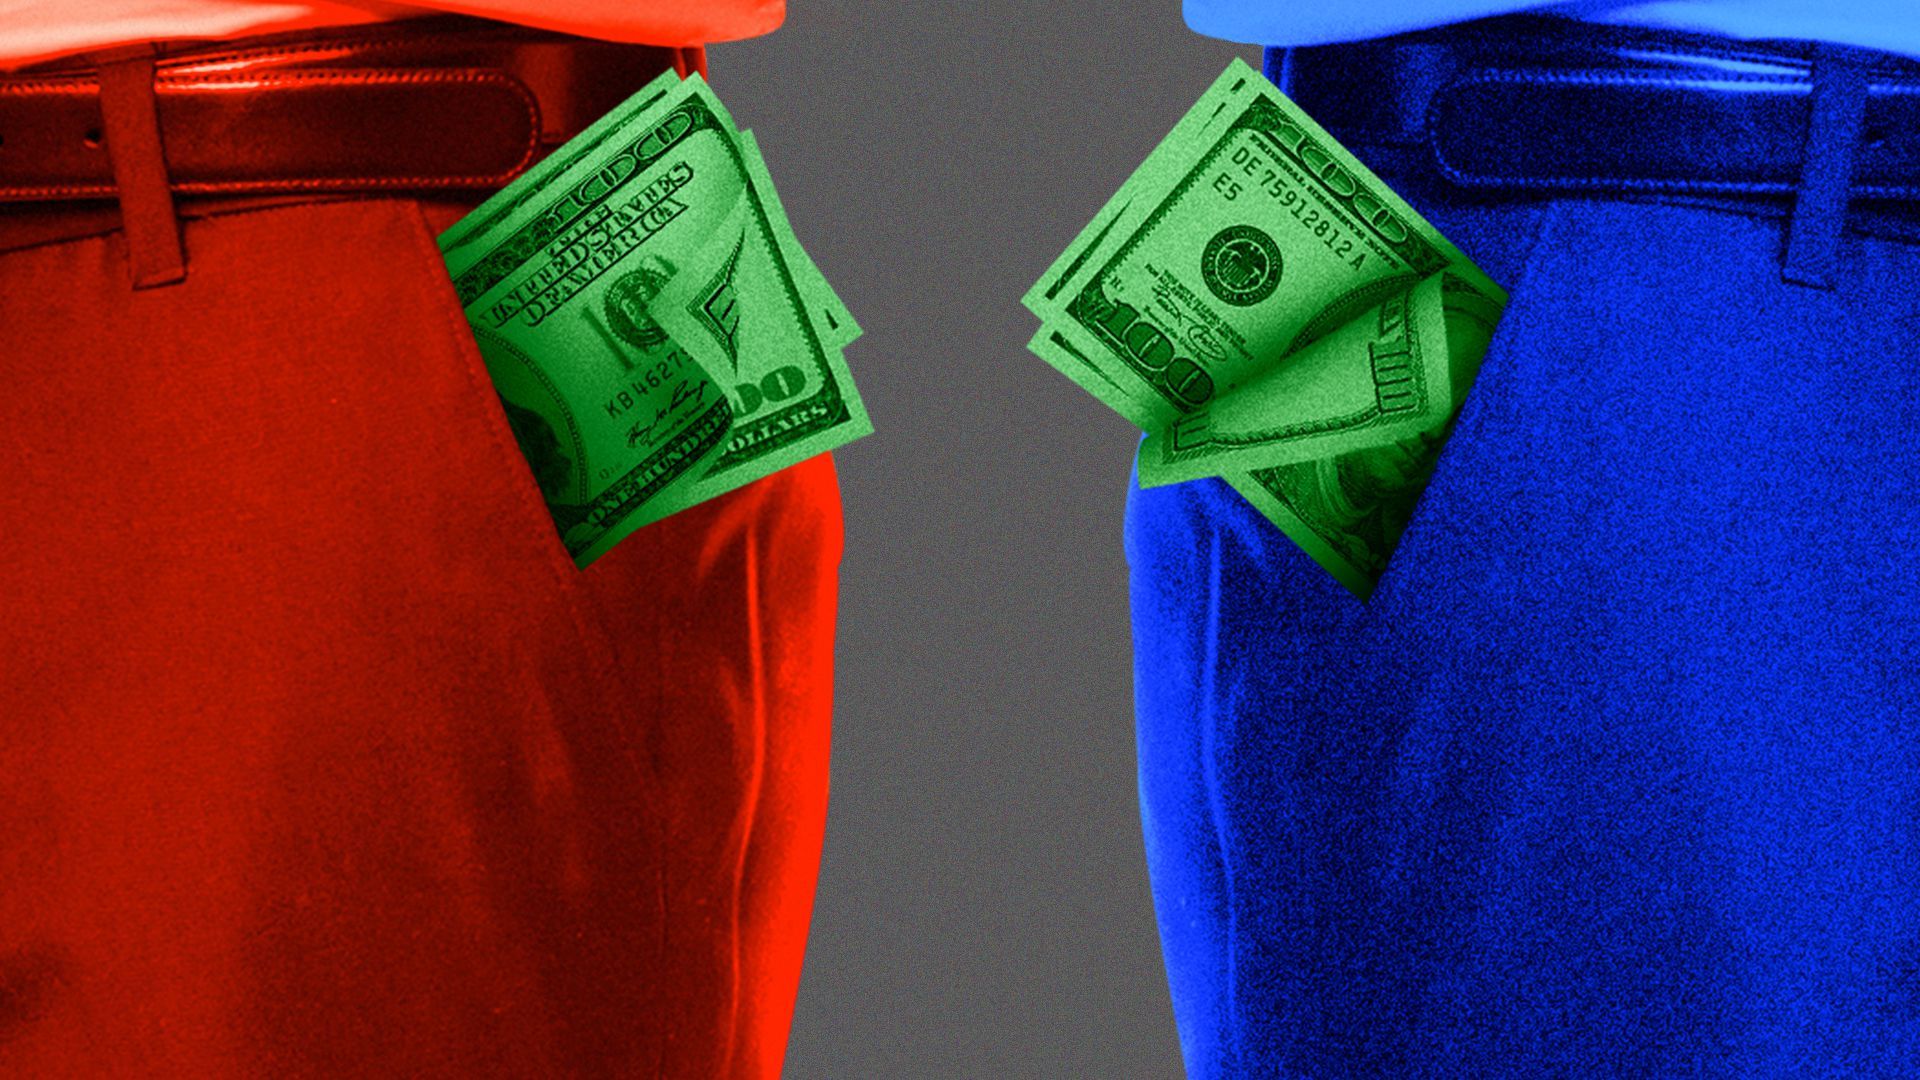 Illustration of a close up of two people showing hundred dollar bills in their pockets, one person is in red and the other is in blue.